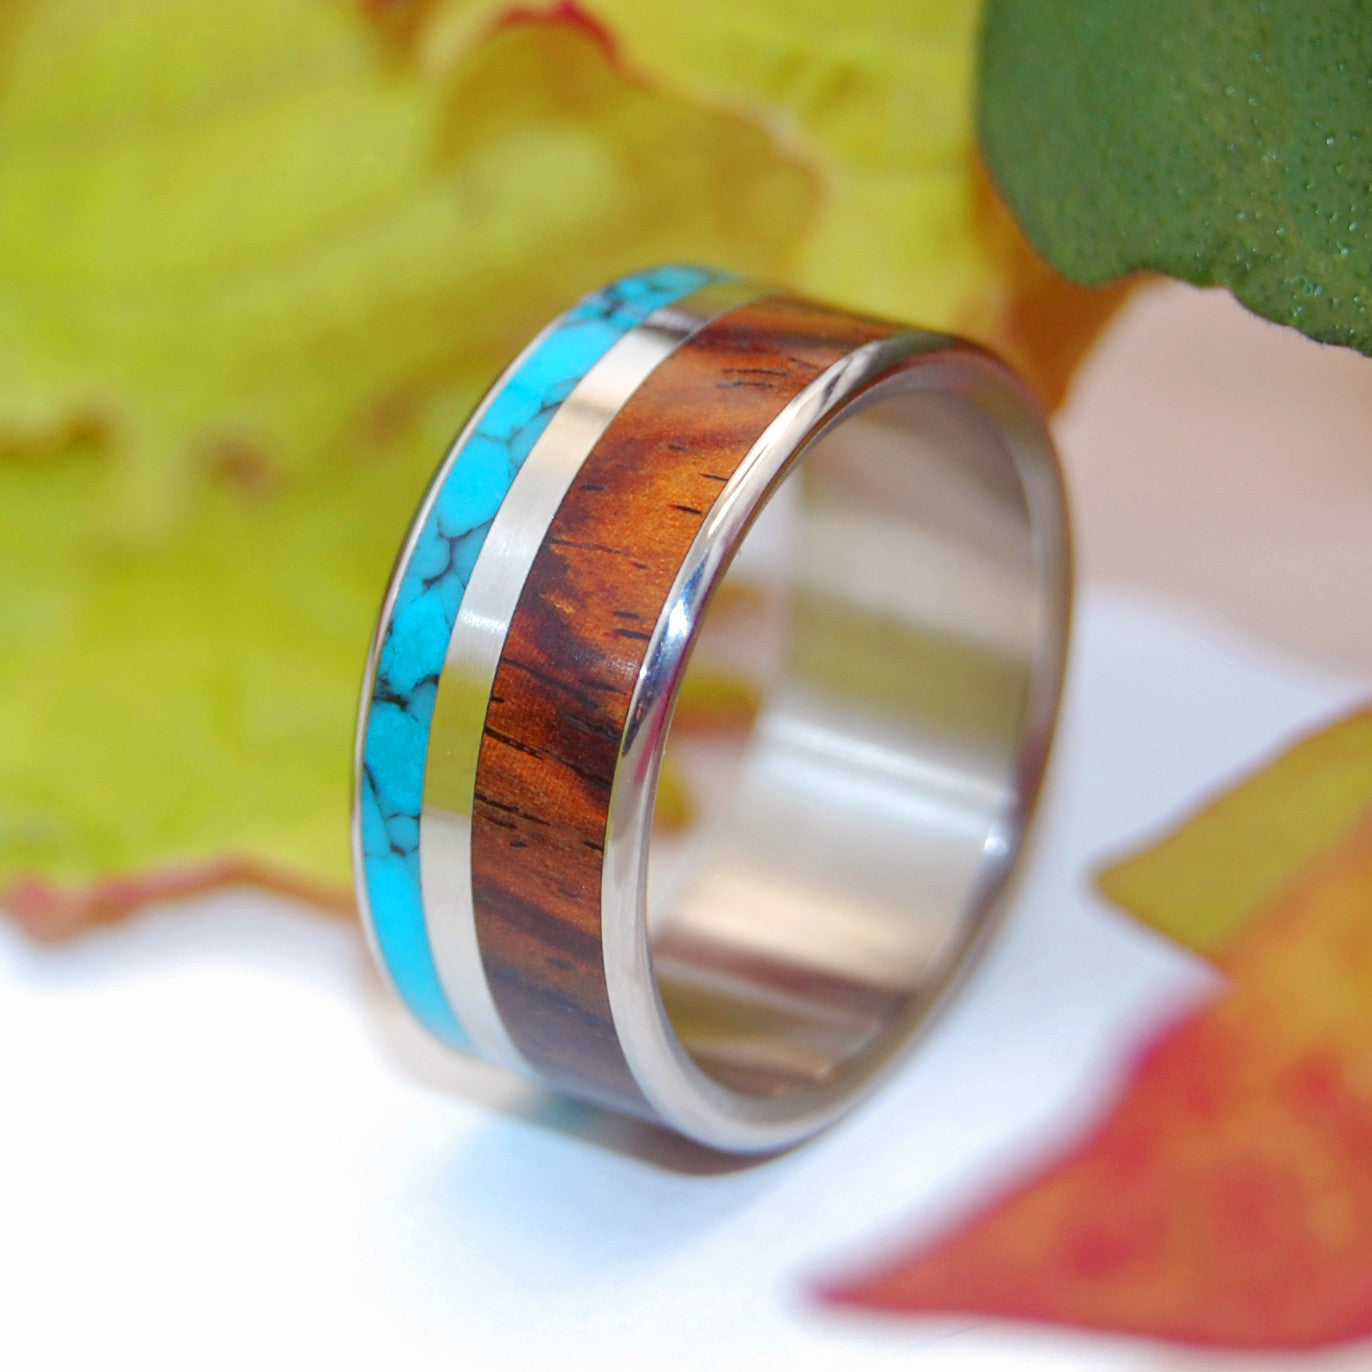 Love and Beyond | Turquoise and Wood - Titanium Wedding Ring - Minter and Richter Designs